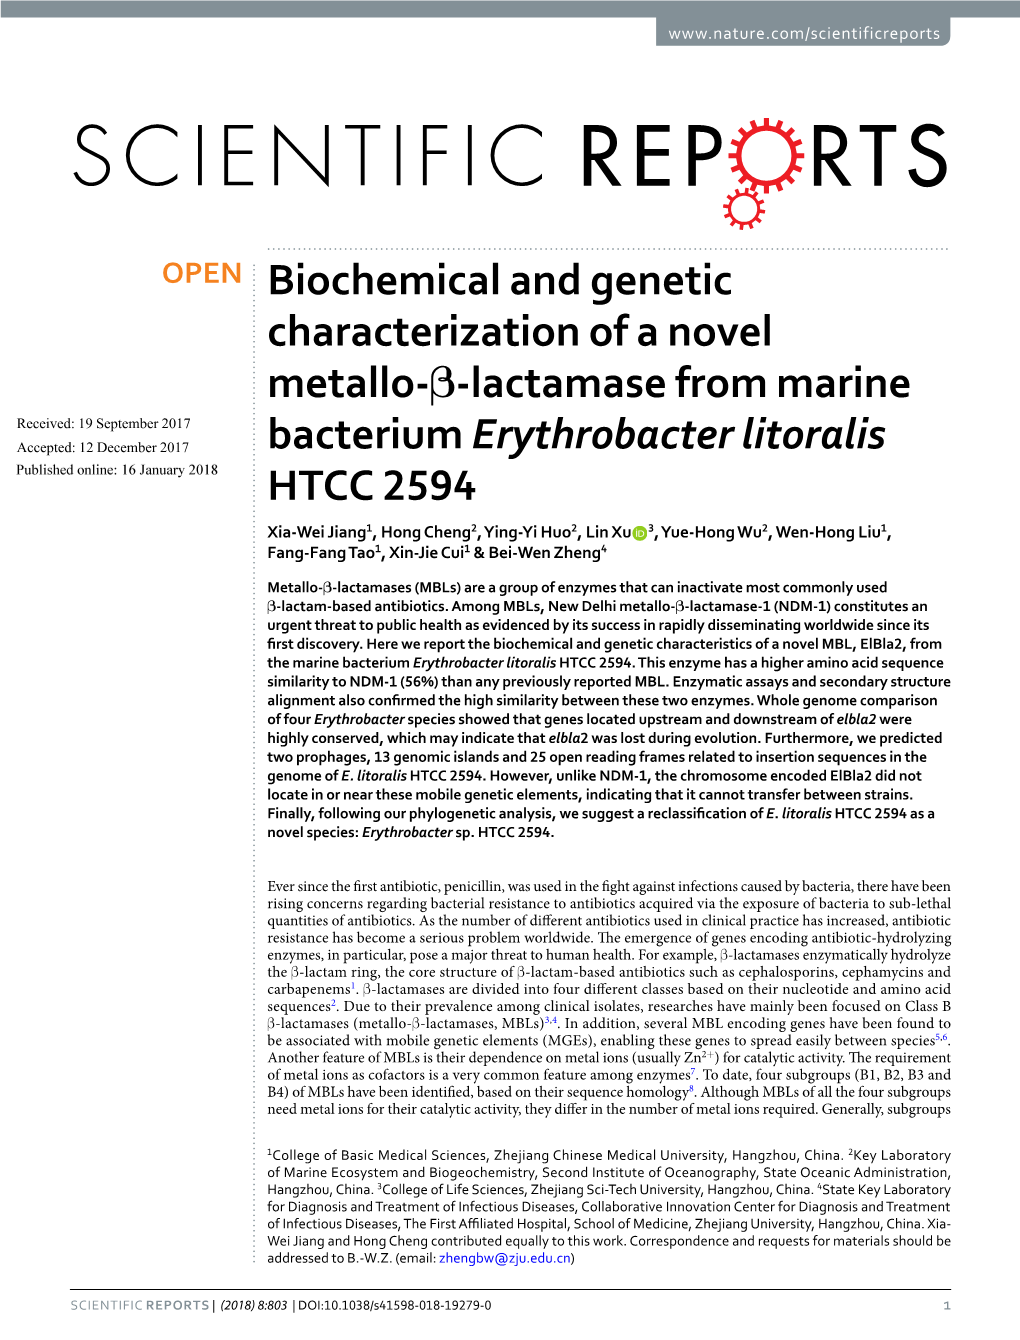 Biochemical and Genetic Characterization of a Novel Metallo-Β-Lactamase from Marine Bacterium Erythrobacter Litoralis HTCC 2594